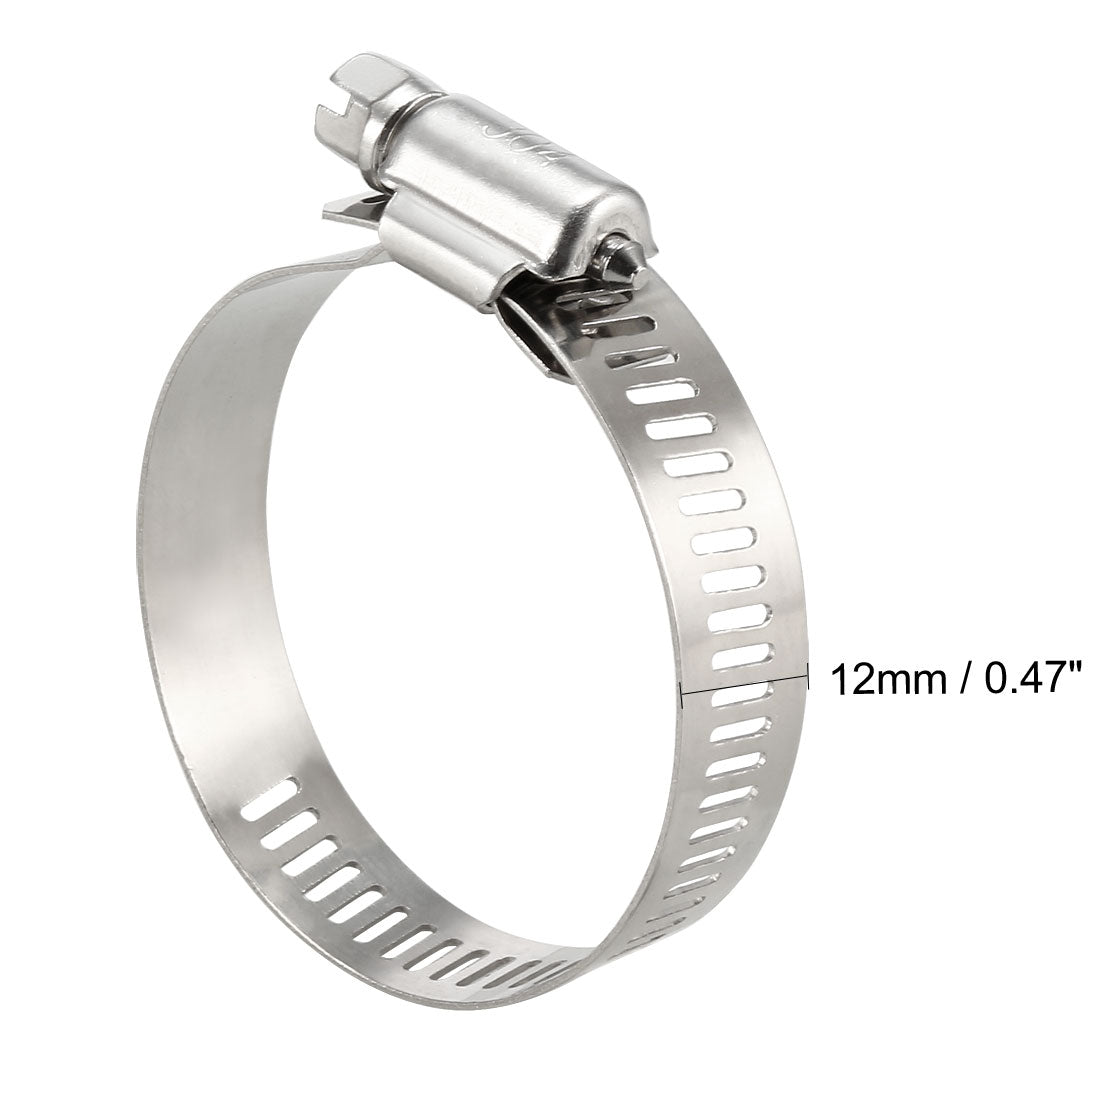 uxcell Uxcell 27-51mm  Gear Hose Clamp, 304 Stainless Steel Fuel Line Clamp 10 Pcs